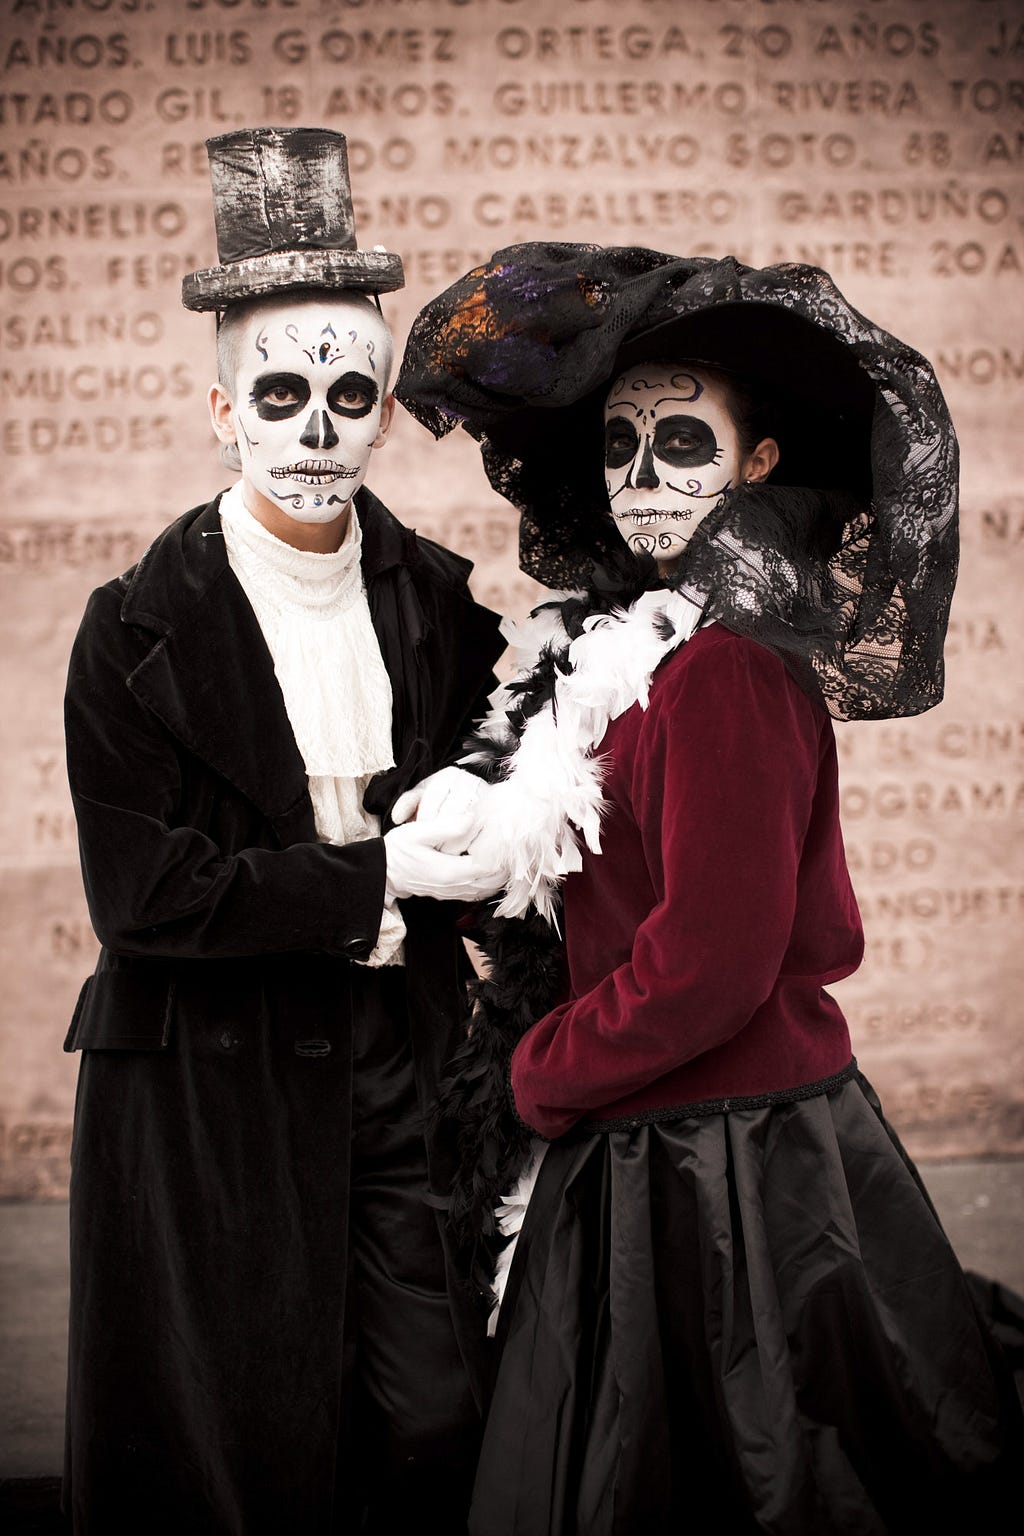 In the early twentieth century, Mexican cartoonist José Guadalupe Posada created a series of satiric zinc etchings depicting dandified calaveras (skeletons), including one wearing an extravagant bonnet. La Calavera Catrina and her consort are now an integral part of Day of the Dead festivities. ©James Fisher 2017 All Rights Reserved